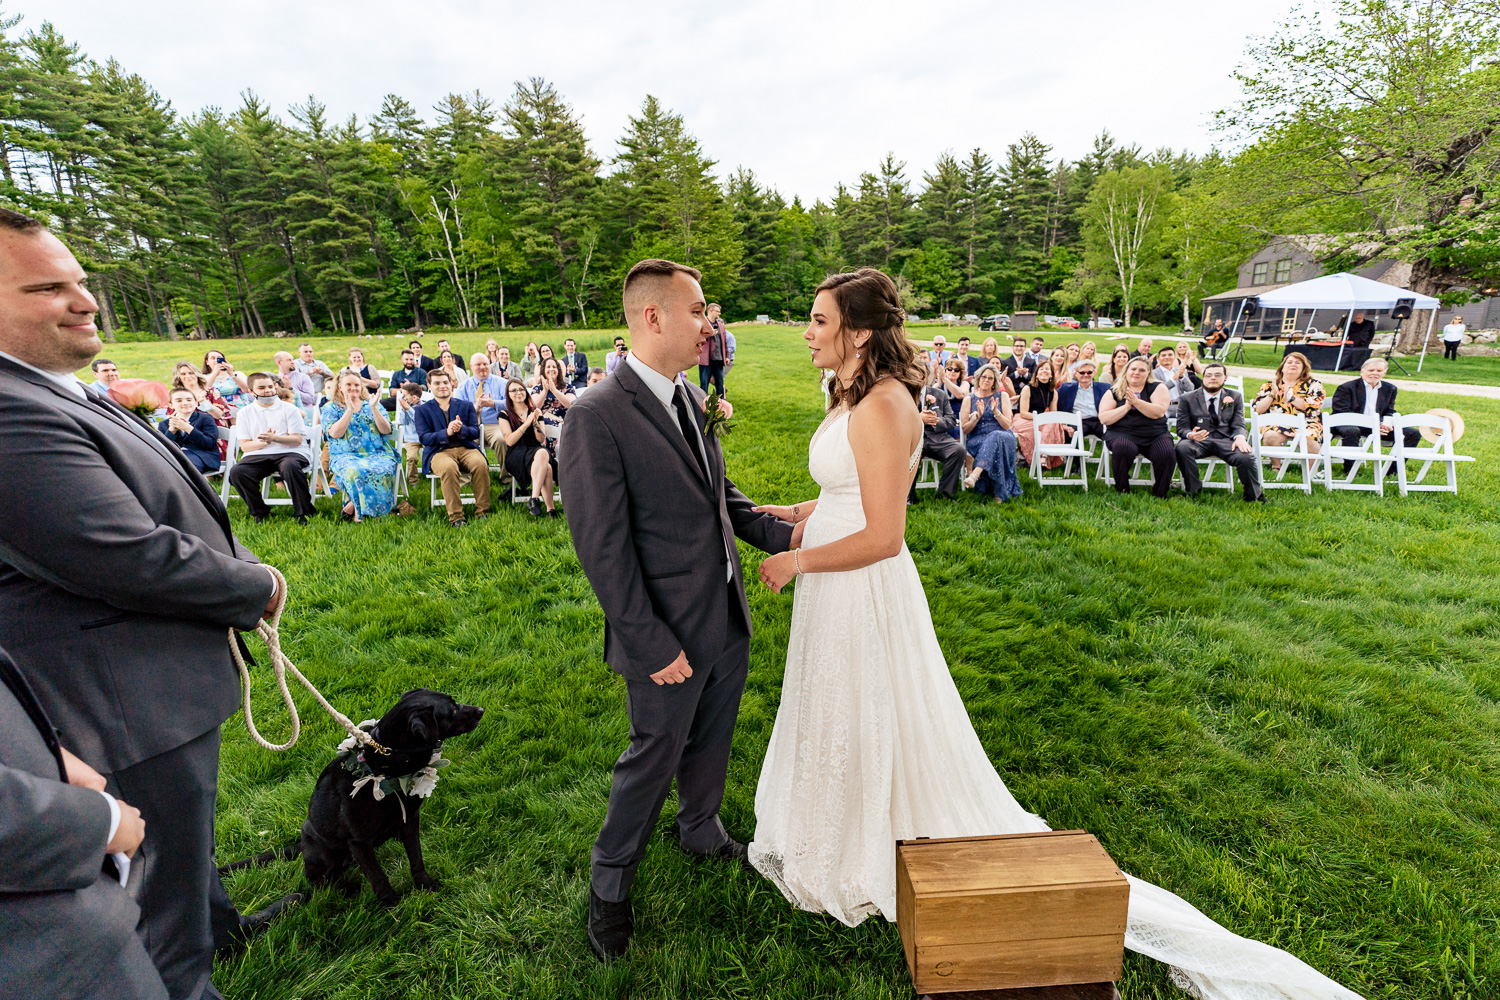 Whiteface hollow, NH wedding ceremony